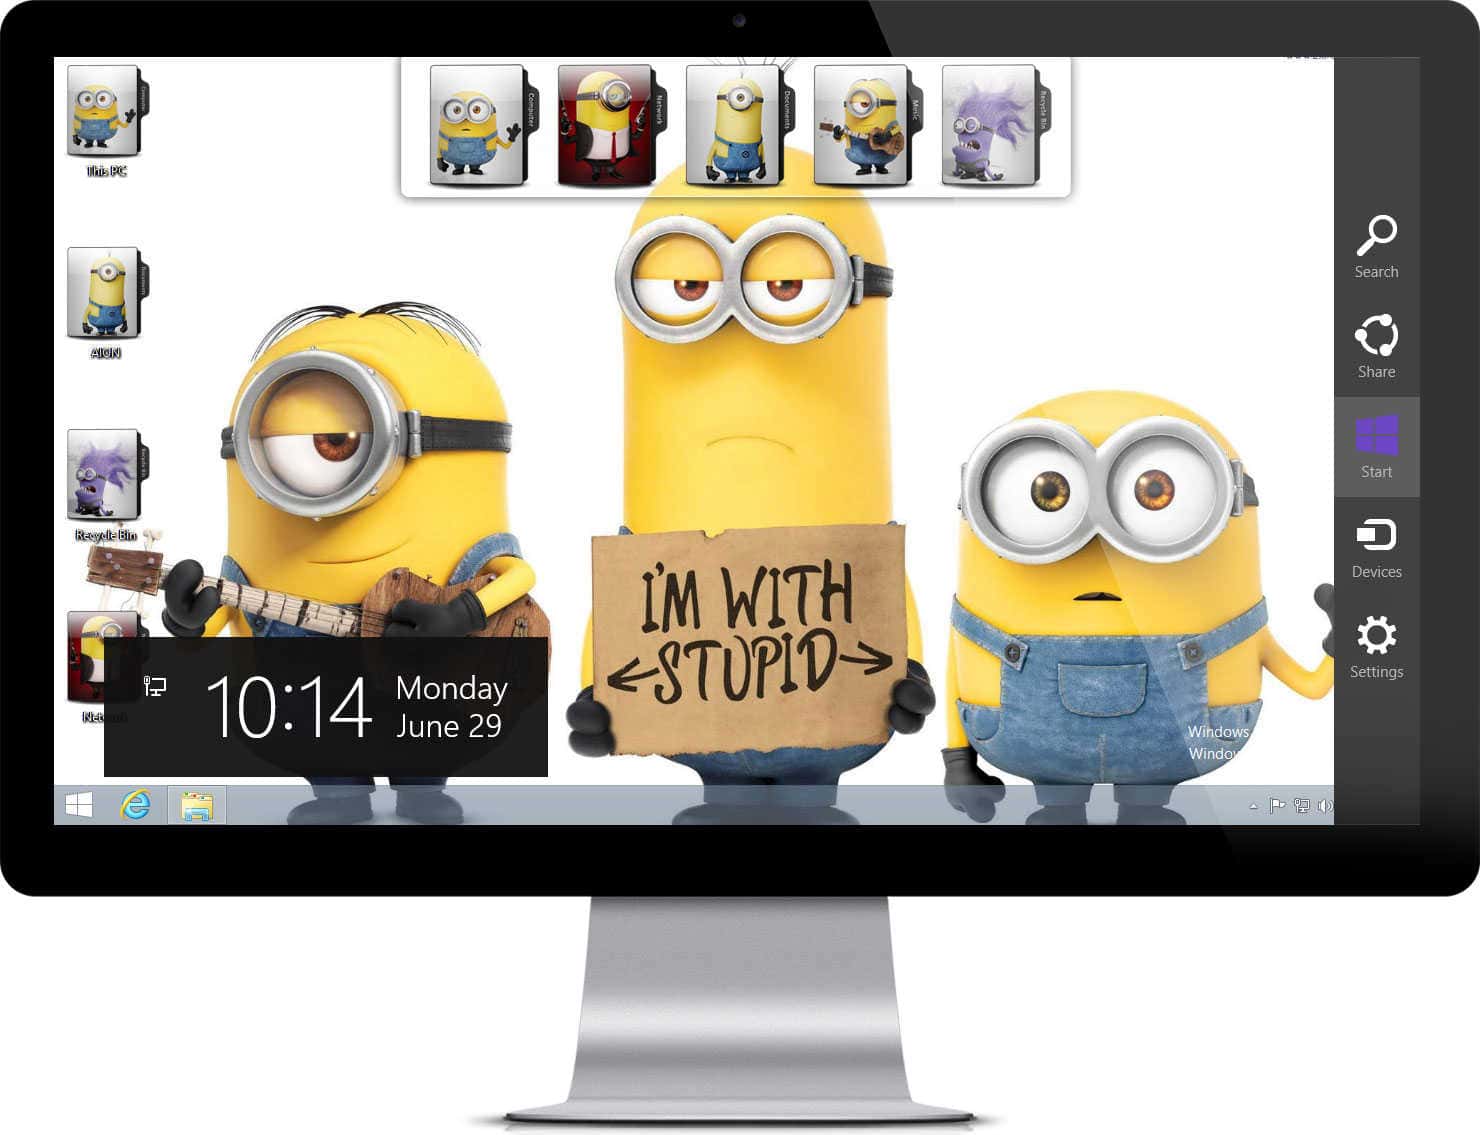 Minions Theme - Best Wishes New Year Funny - HD Wallpaper 